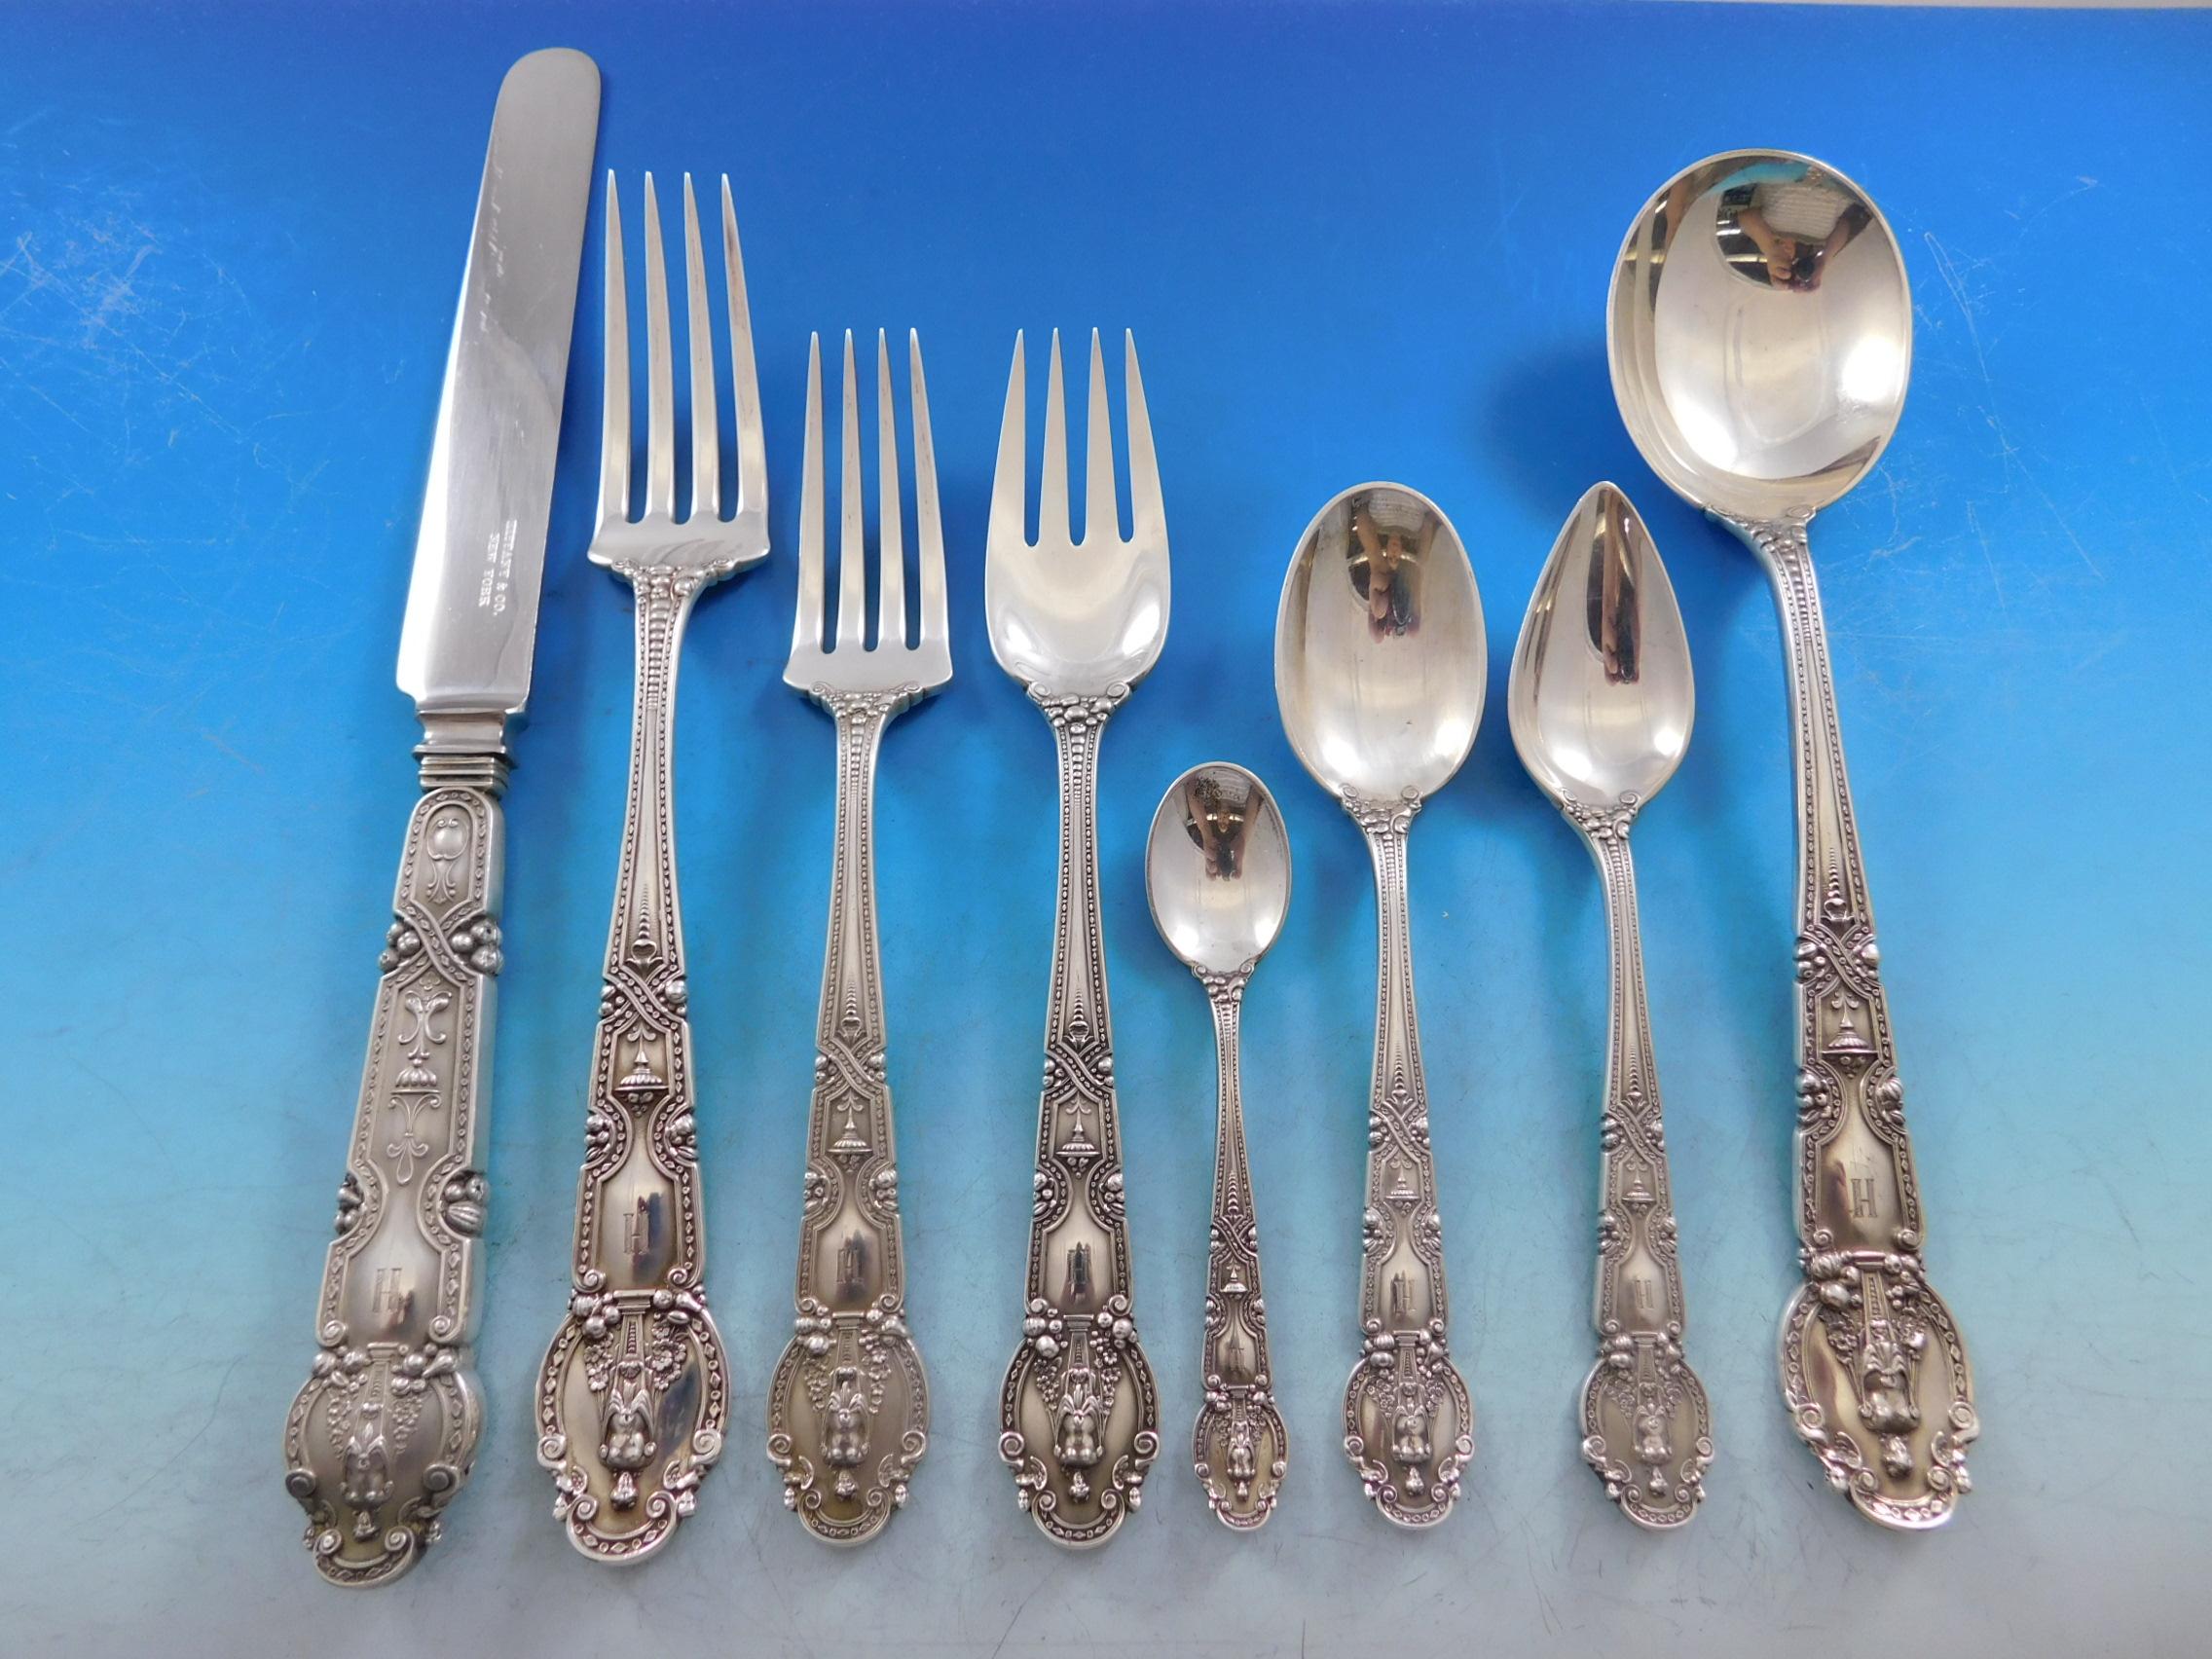 Superb Renaissance by Tiffany & Co sterling silver Flatware set - 156 pieces. This multi-motif pattern was designed by Paulding Farmhan and was introduced in the year 1905. This set came from the Herbst Estate in San Francisco. Ms. Herbst was